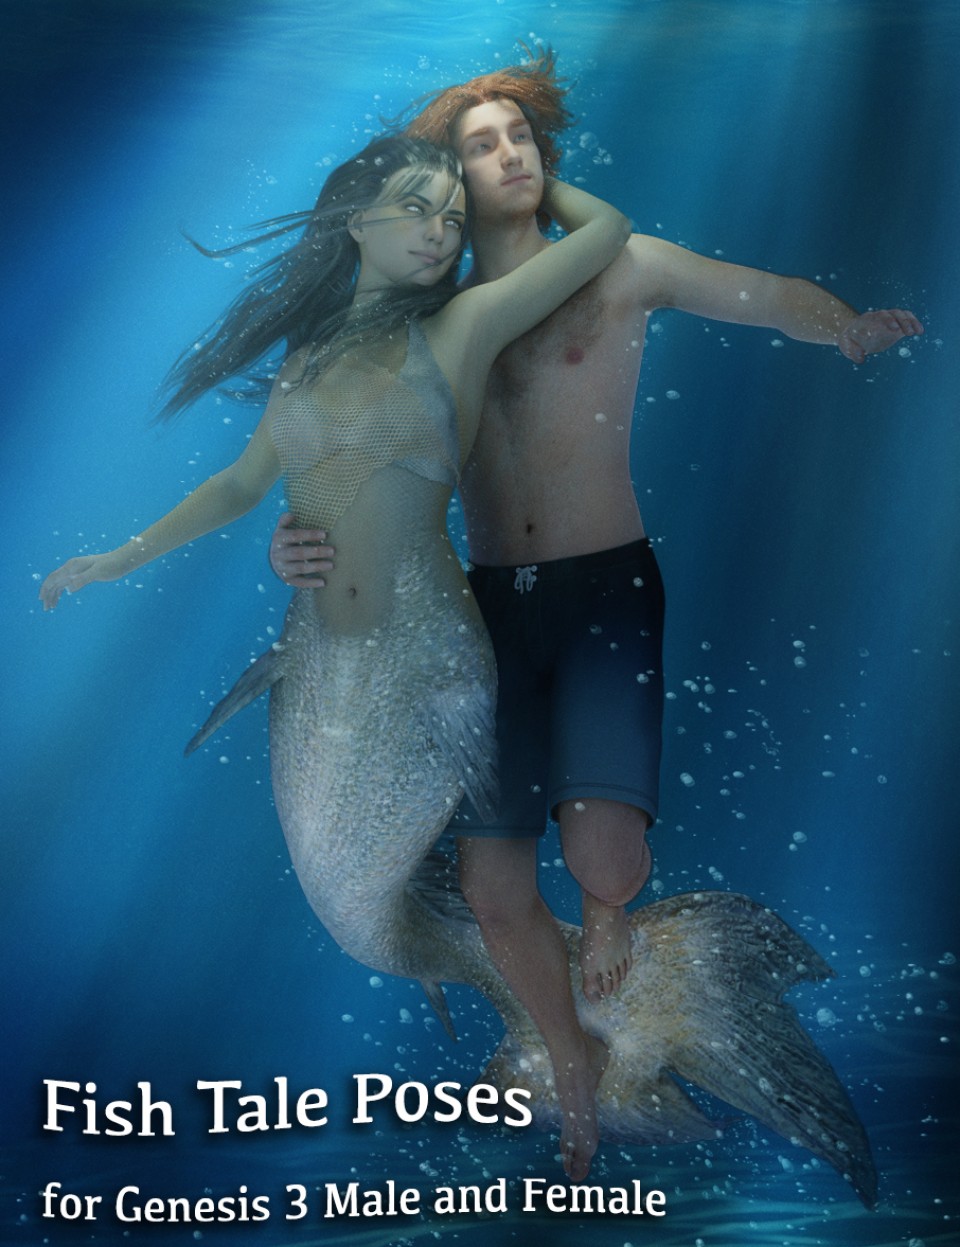 Fish Tale Poses for Genesis 3 Male and Female_DAZ3D下载站